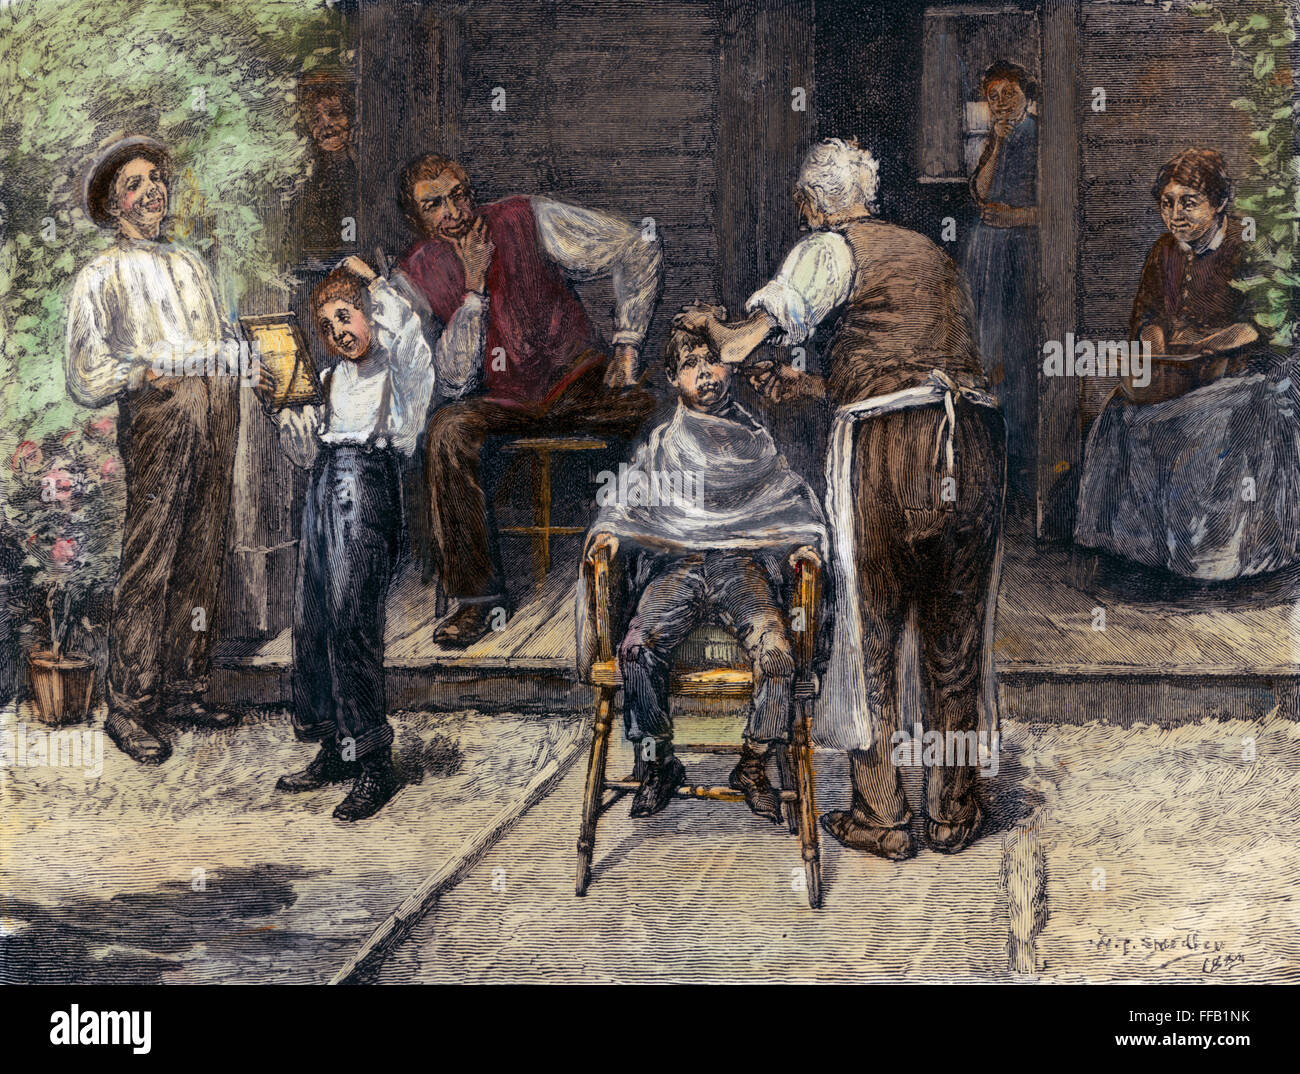 THE VILLAGE BARBER, 1883. /nWood engraving, American, 1883, after a drawing by William Thomas Smedley. Stock Photo